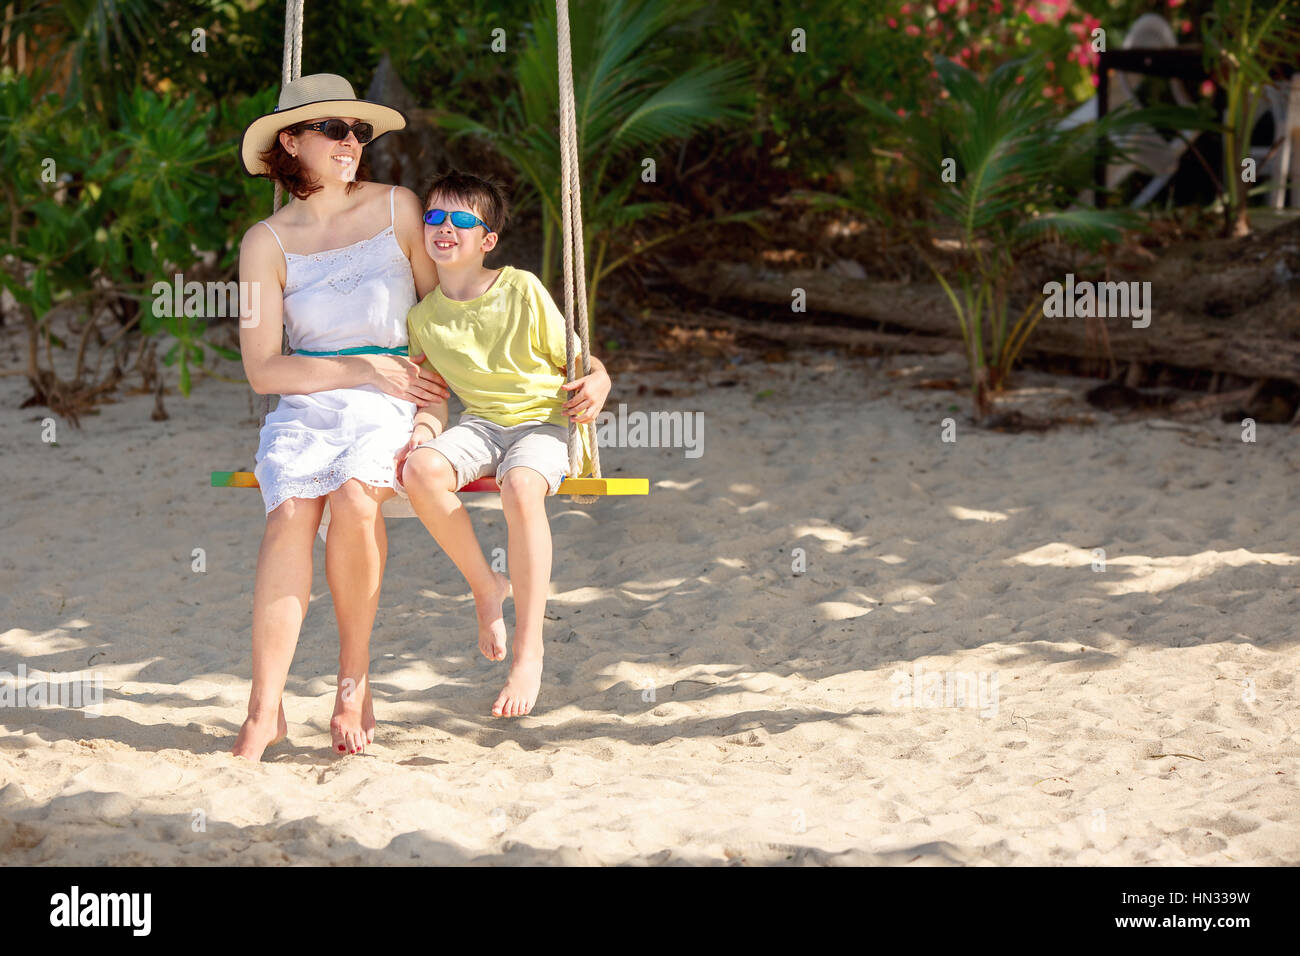 Young beautiful woman swinging her son on a tropical beach, Koh Samui island. Thailand, Asia Stock Photo